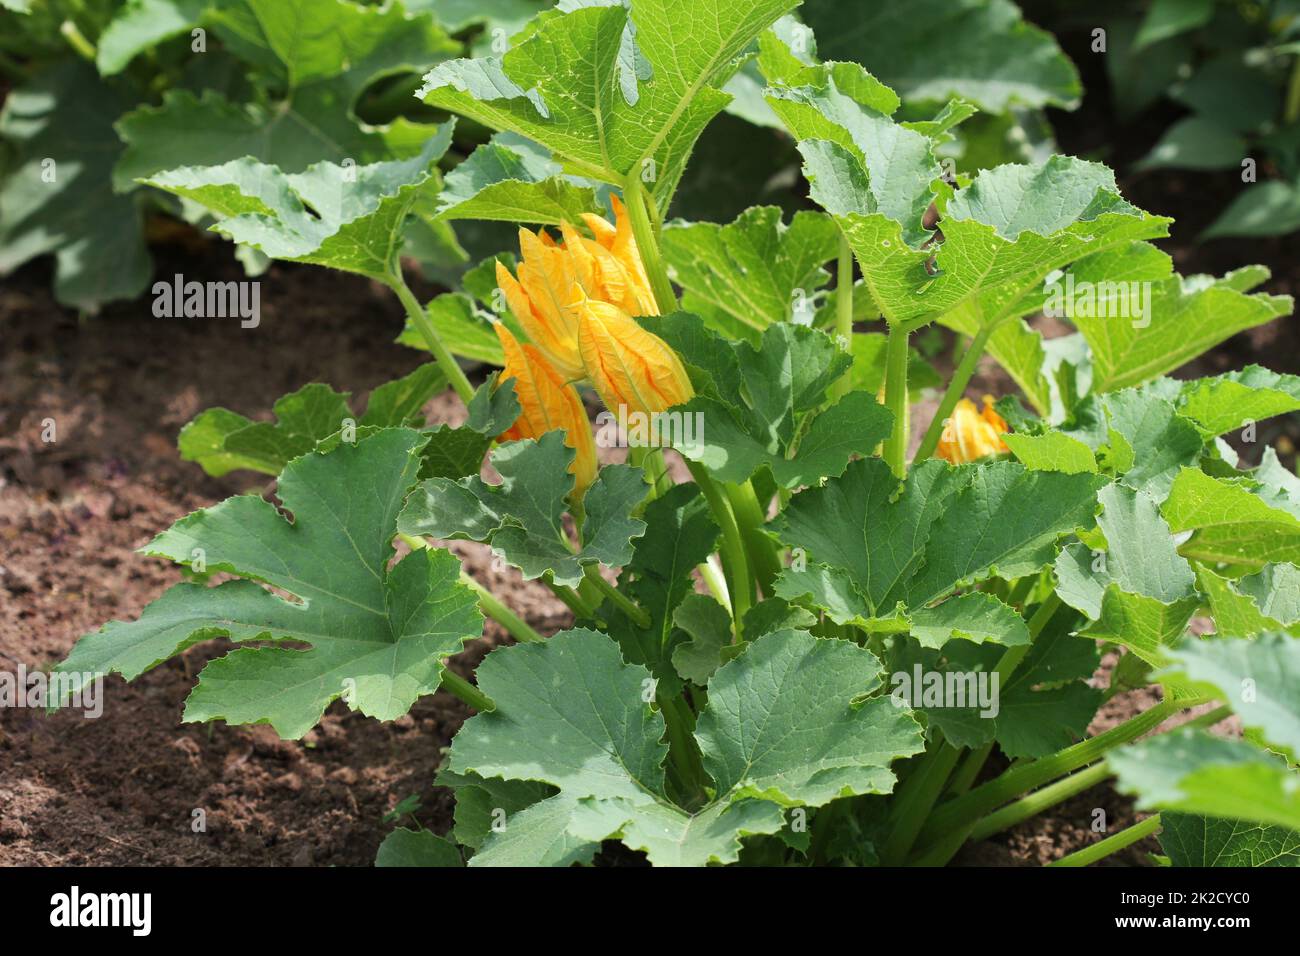 Zucchini plants in blossom on the garden bed Stock Photo